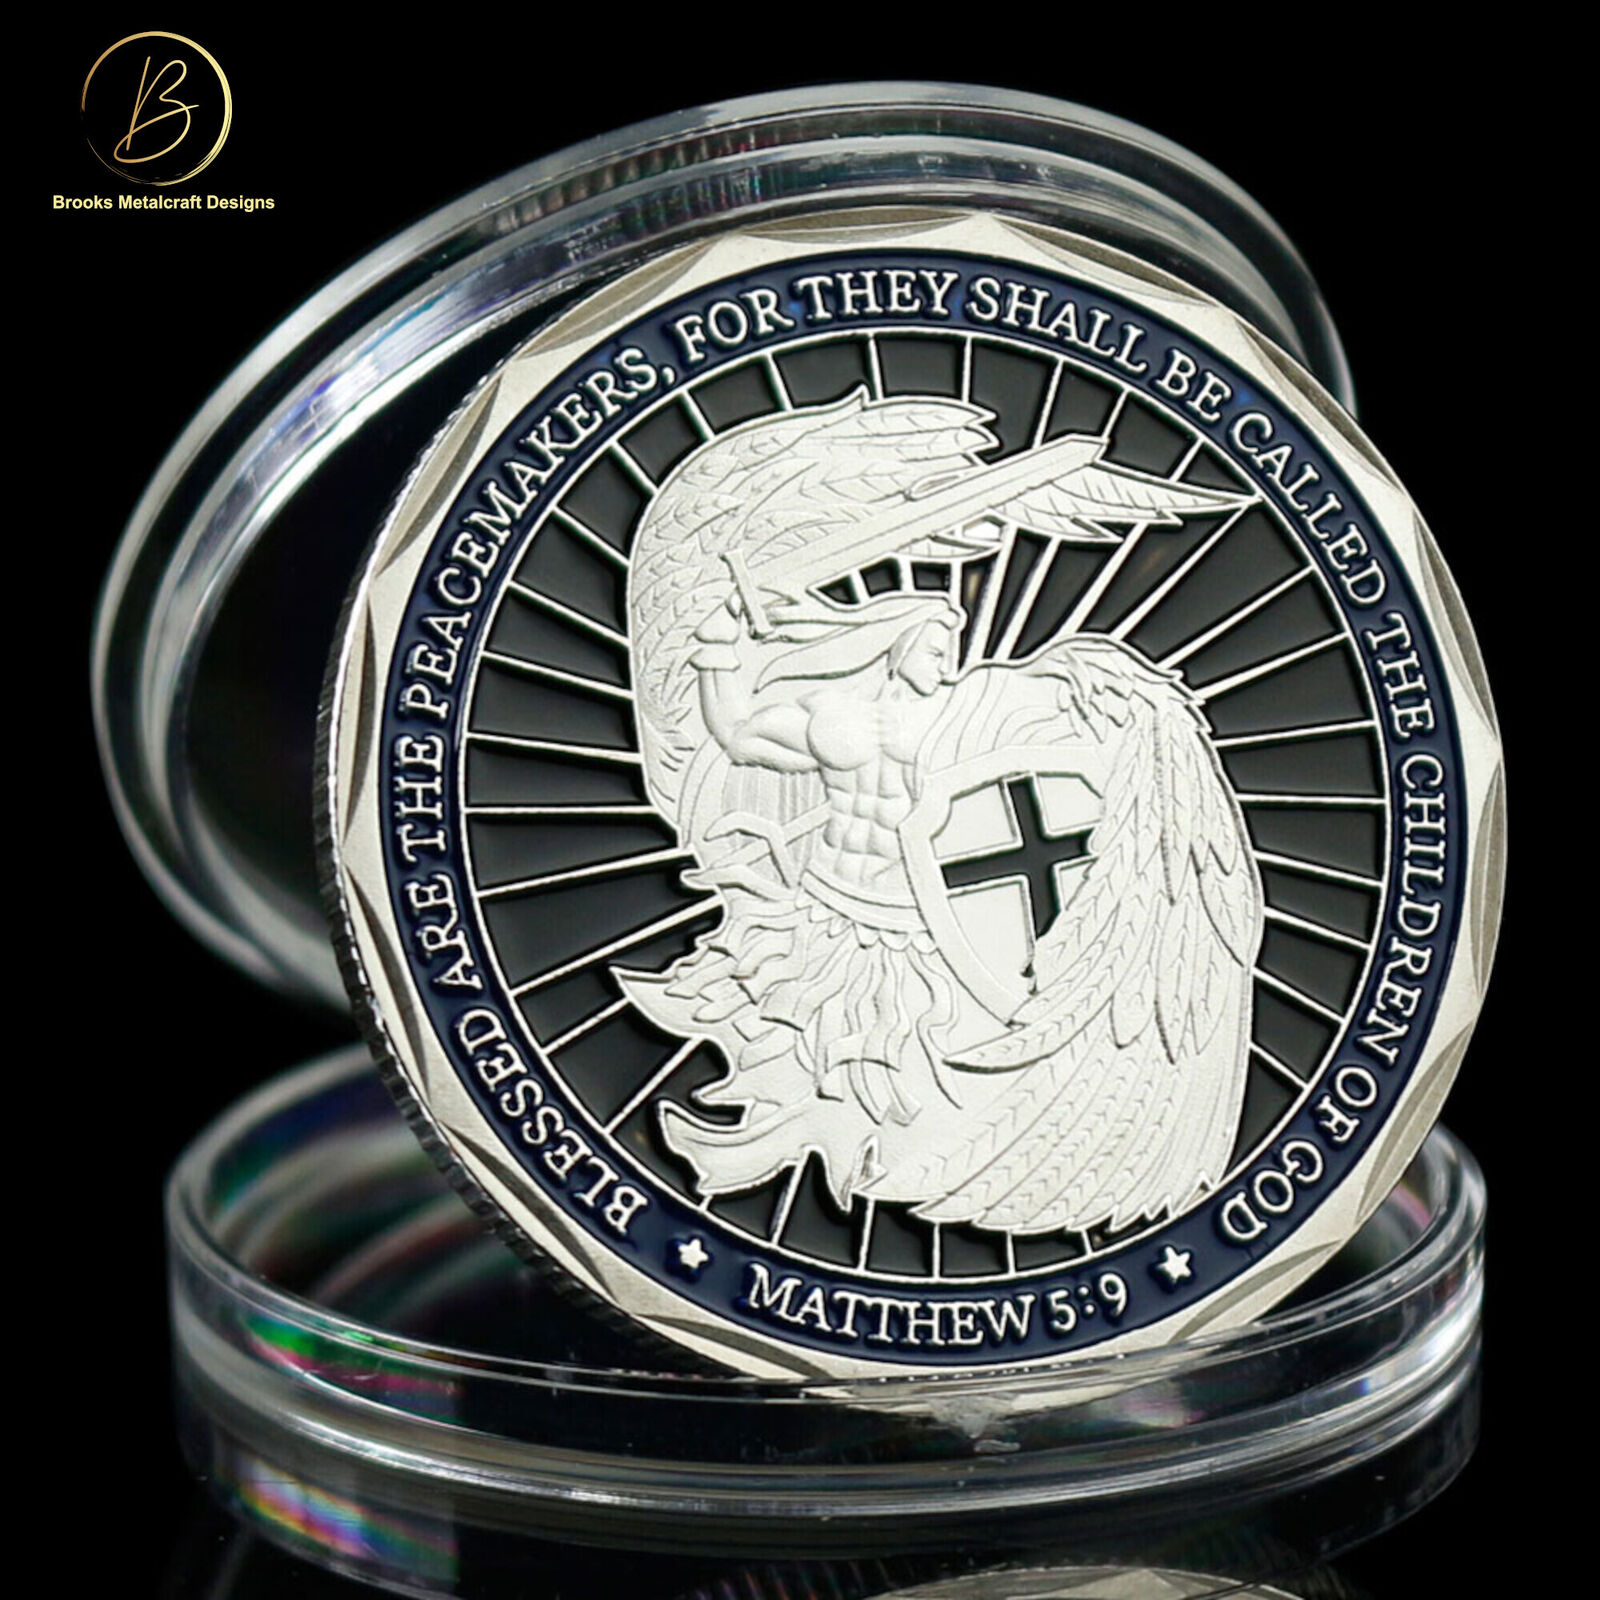 God Bless the Police Matthew 5:9 and Prayer Challenge Coin